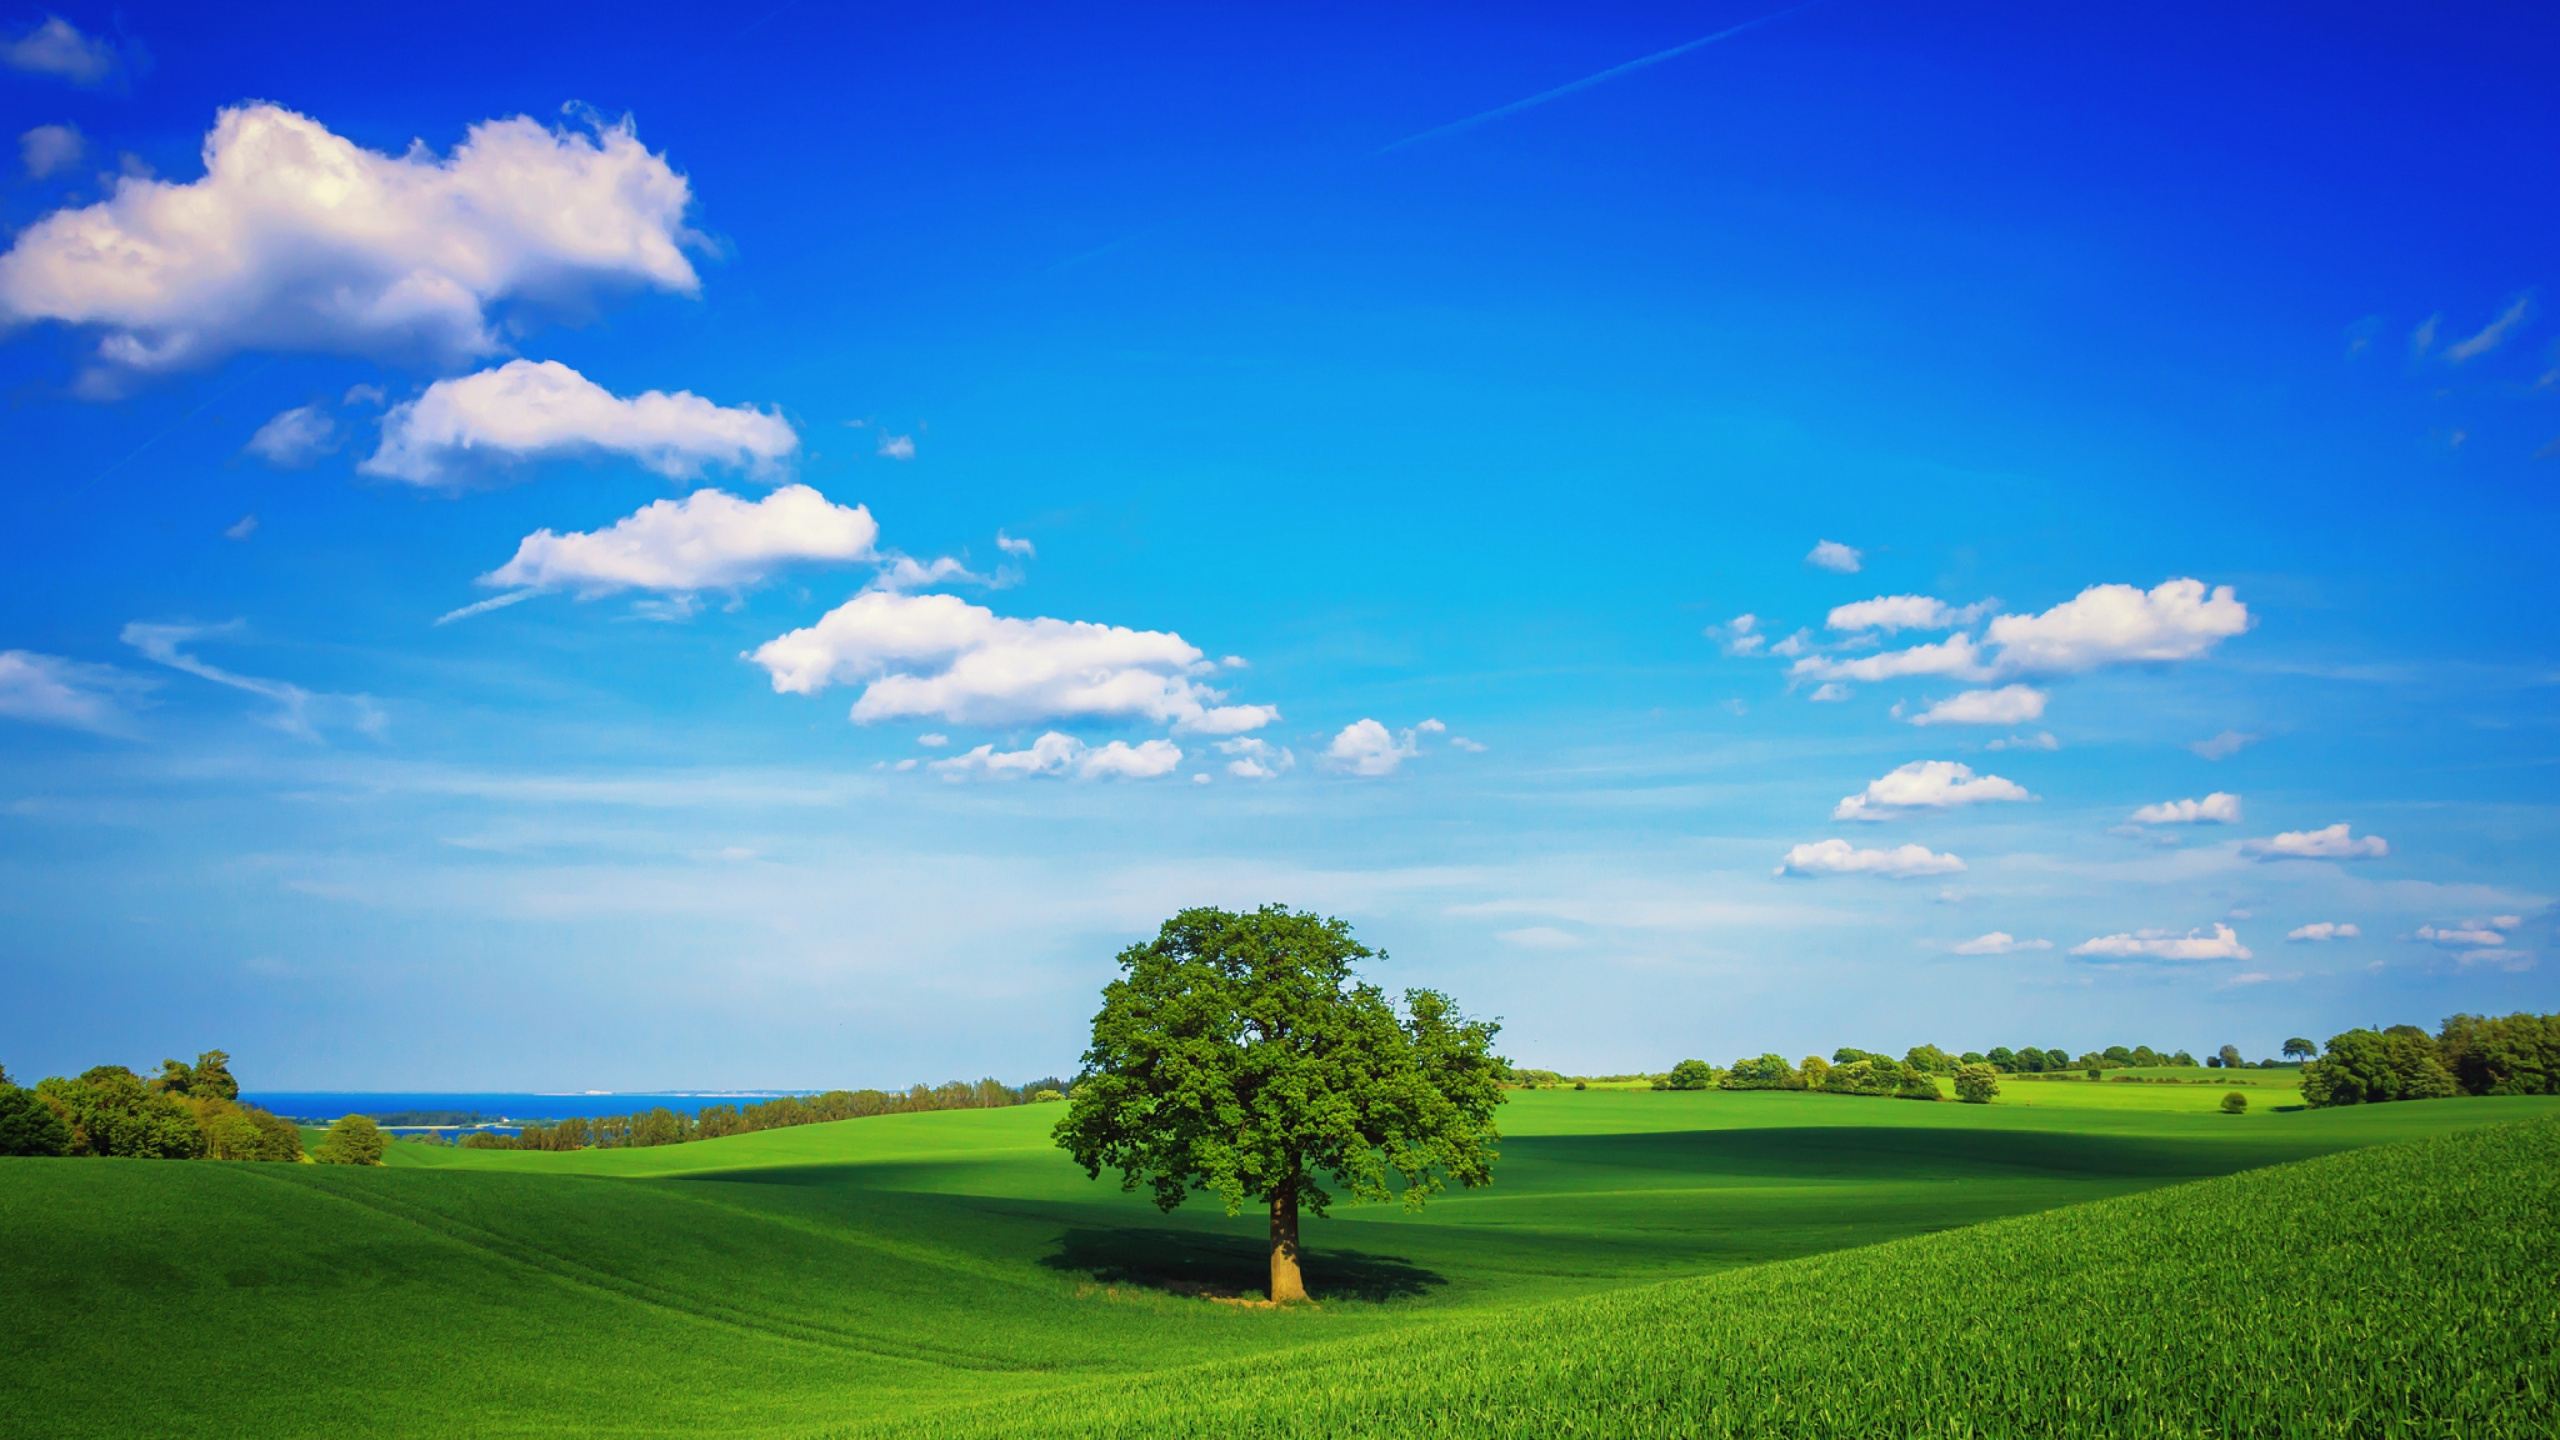 Green Tree on Green Grass Field Under Blue Sky During Daytime. Wallpaper in 2560x1440 Resolution